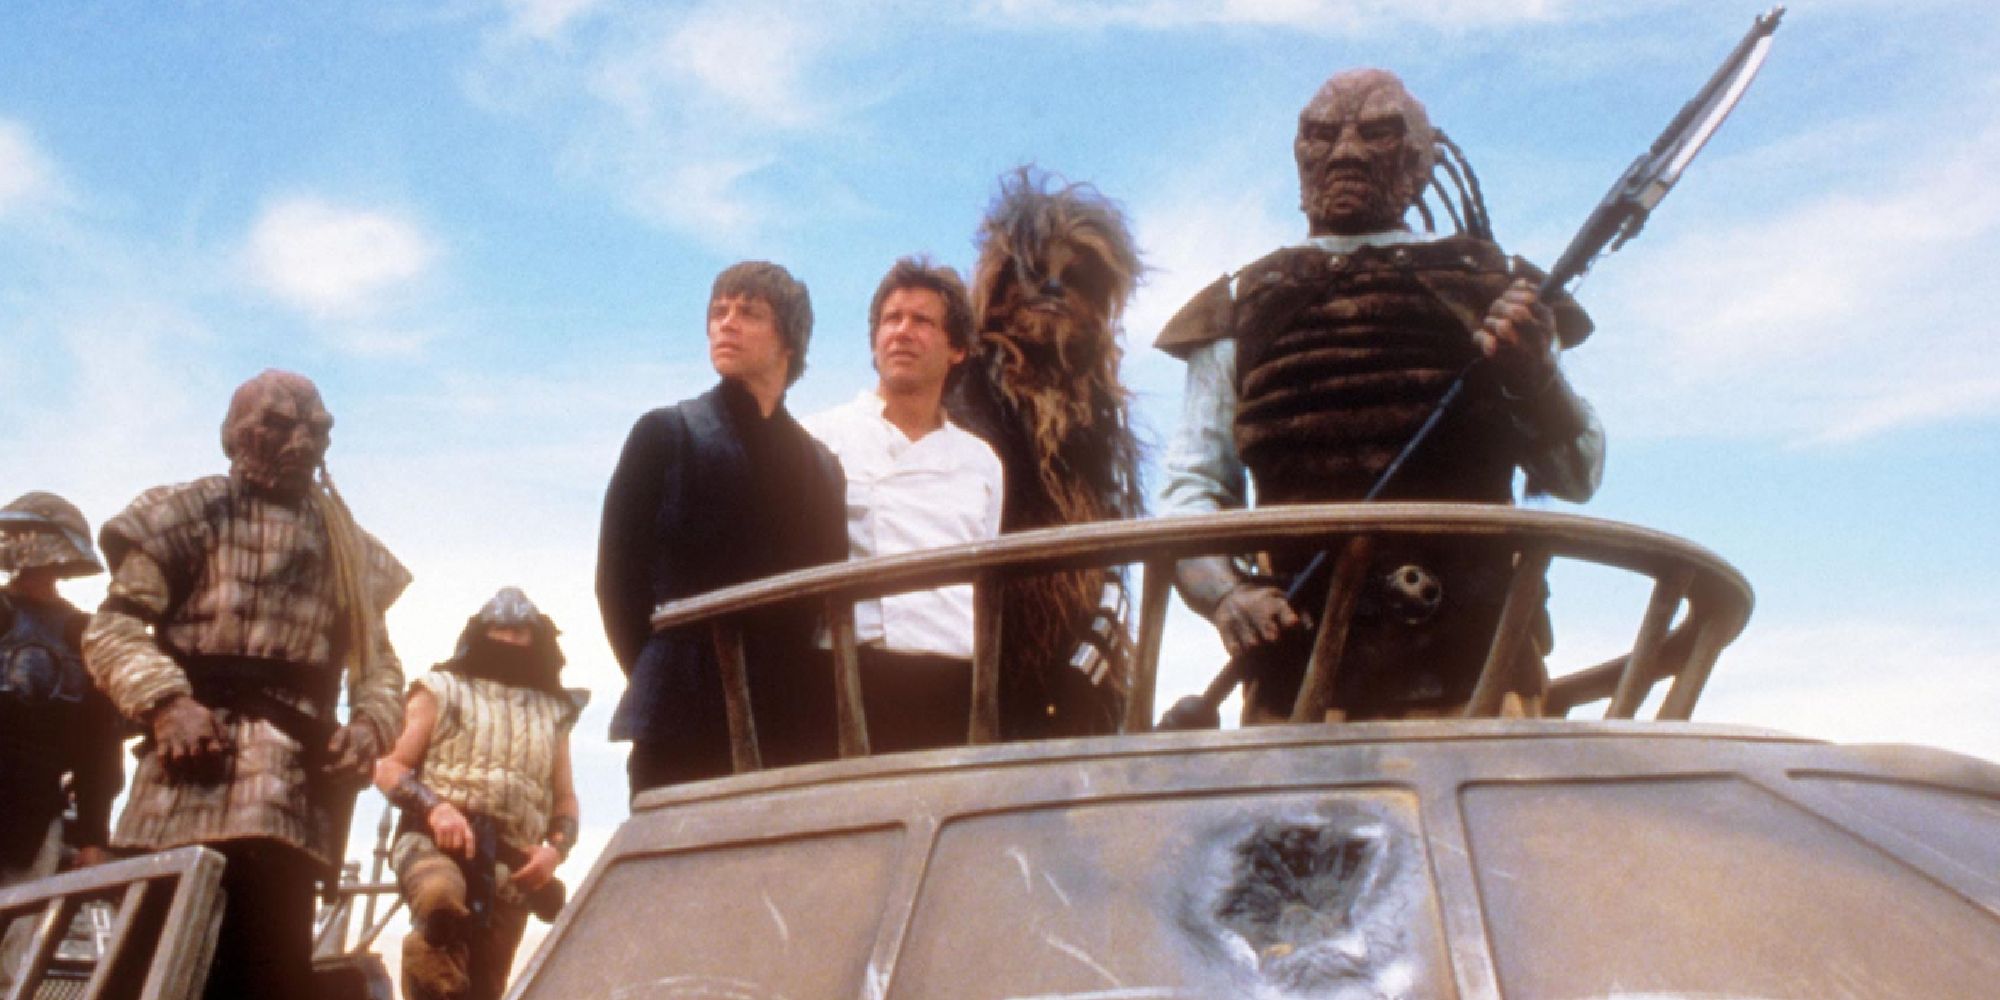 Han, Luke, and Chewy on board Jabba's cruiser about to be thrown into the Sarlacc Pit